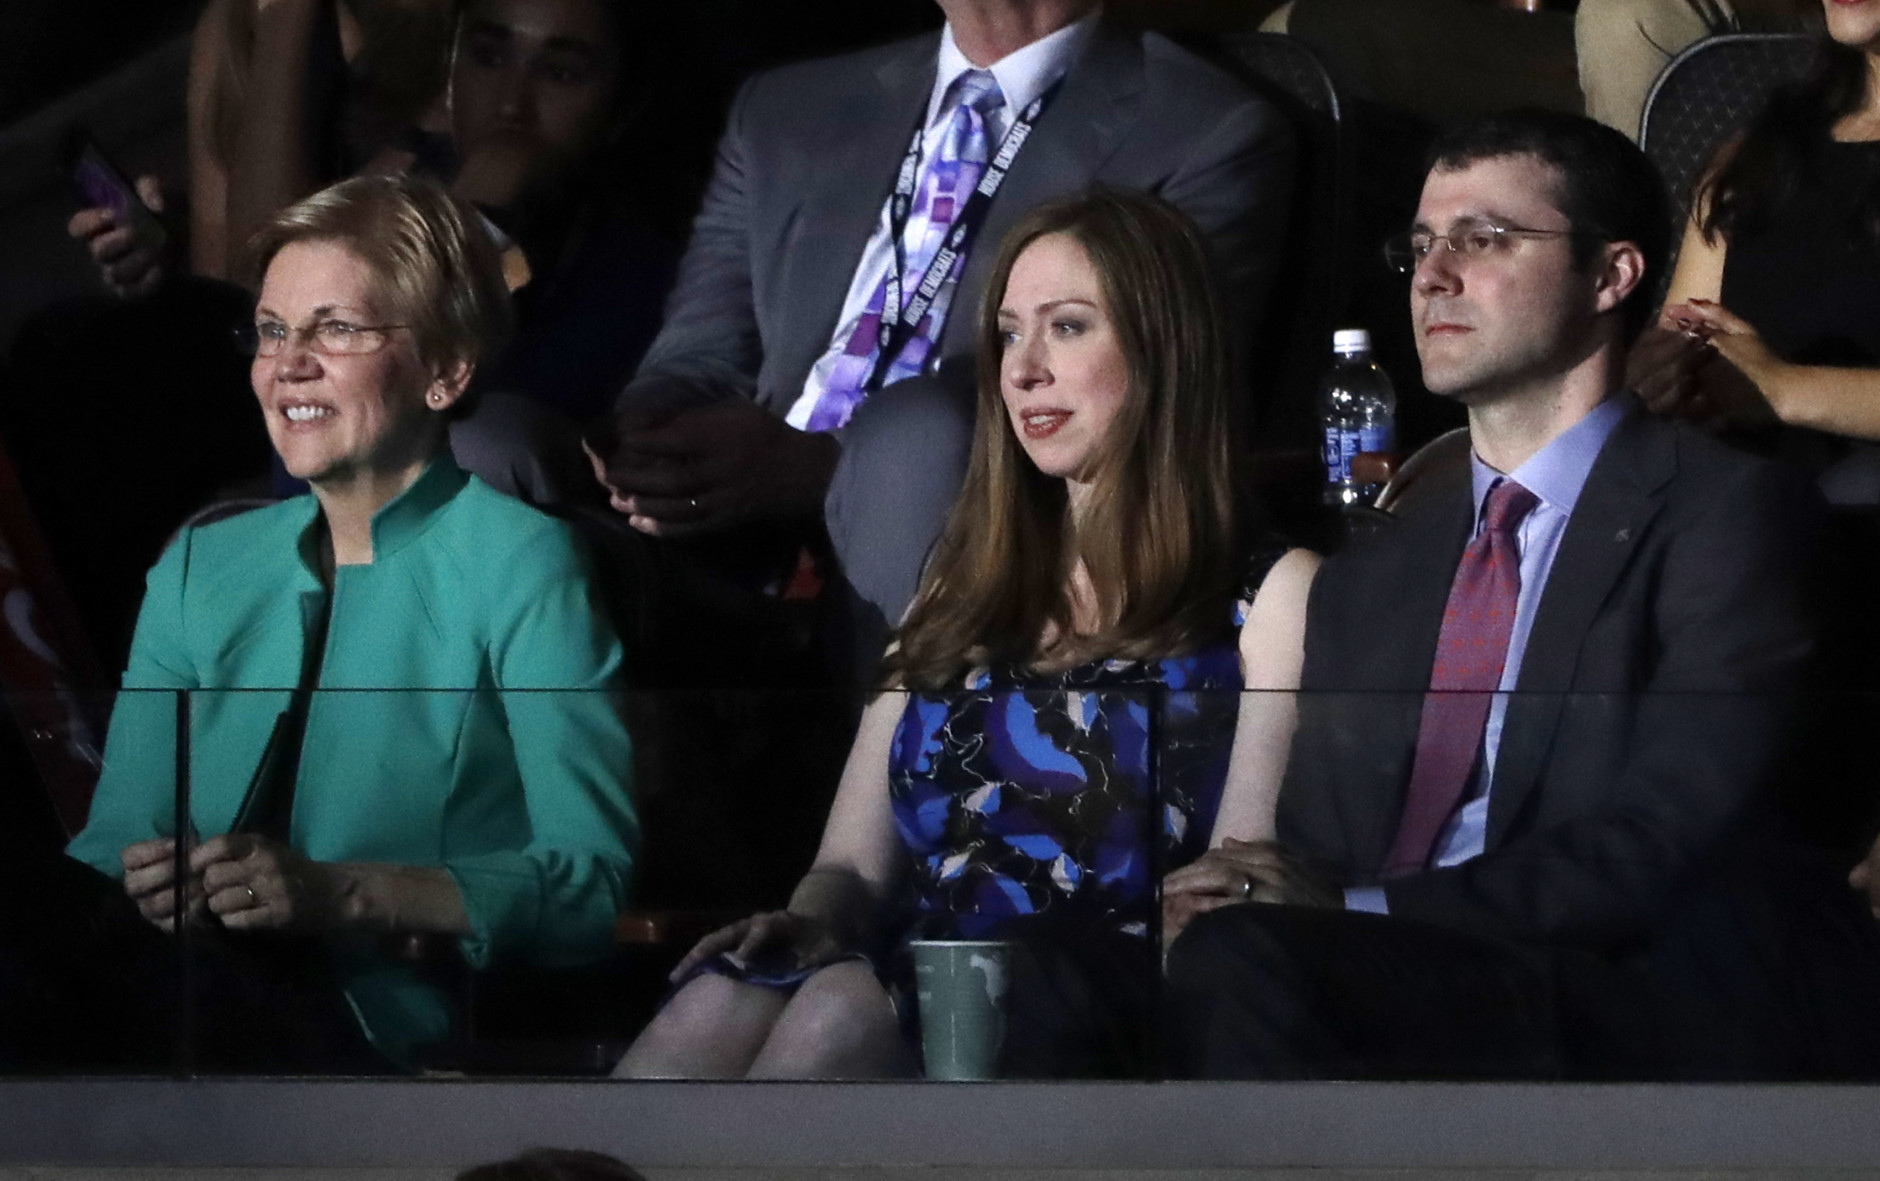 Chelsea Clinton, daughter of Democratic Presidential candidate Hillary Clinton, left, watches alongside her husband Marc Mezvinsky as her father speaks during the second day session of the Democratic National Convention in Philadelphia, Tuesday, July 26, 2016. At left is Sen. Elizabeth Warren, D-Mass. (AP Photo/Matt Rourke)